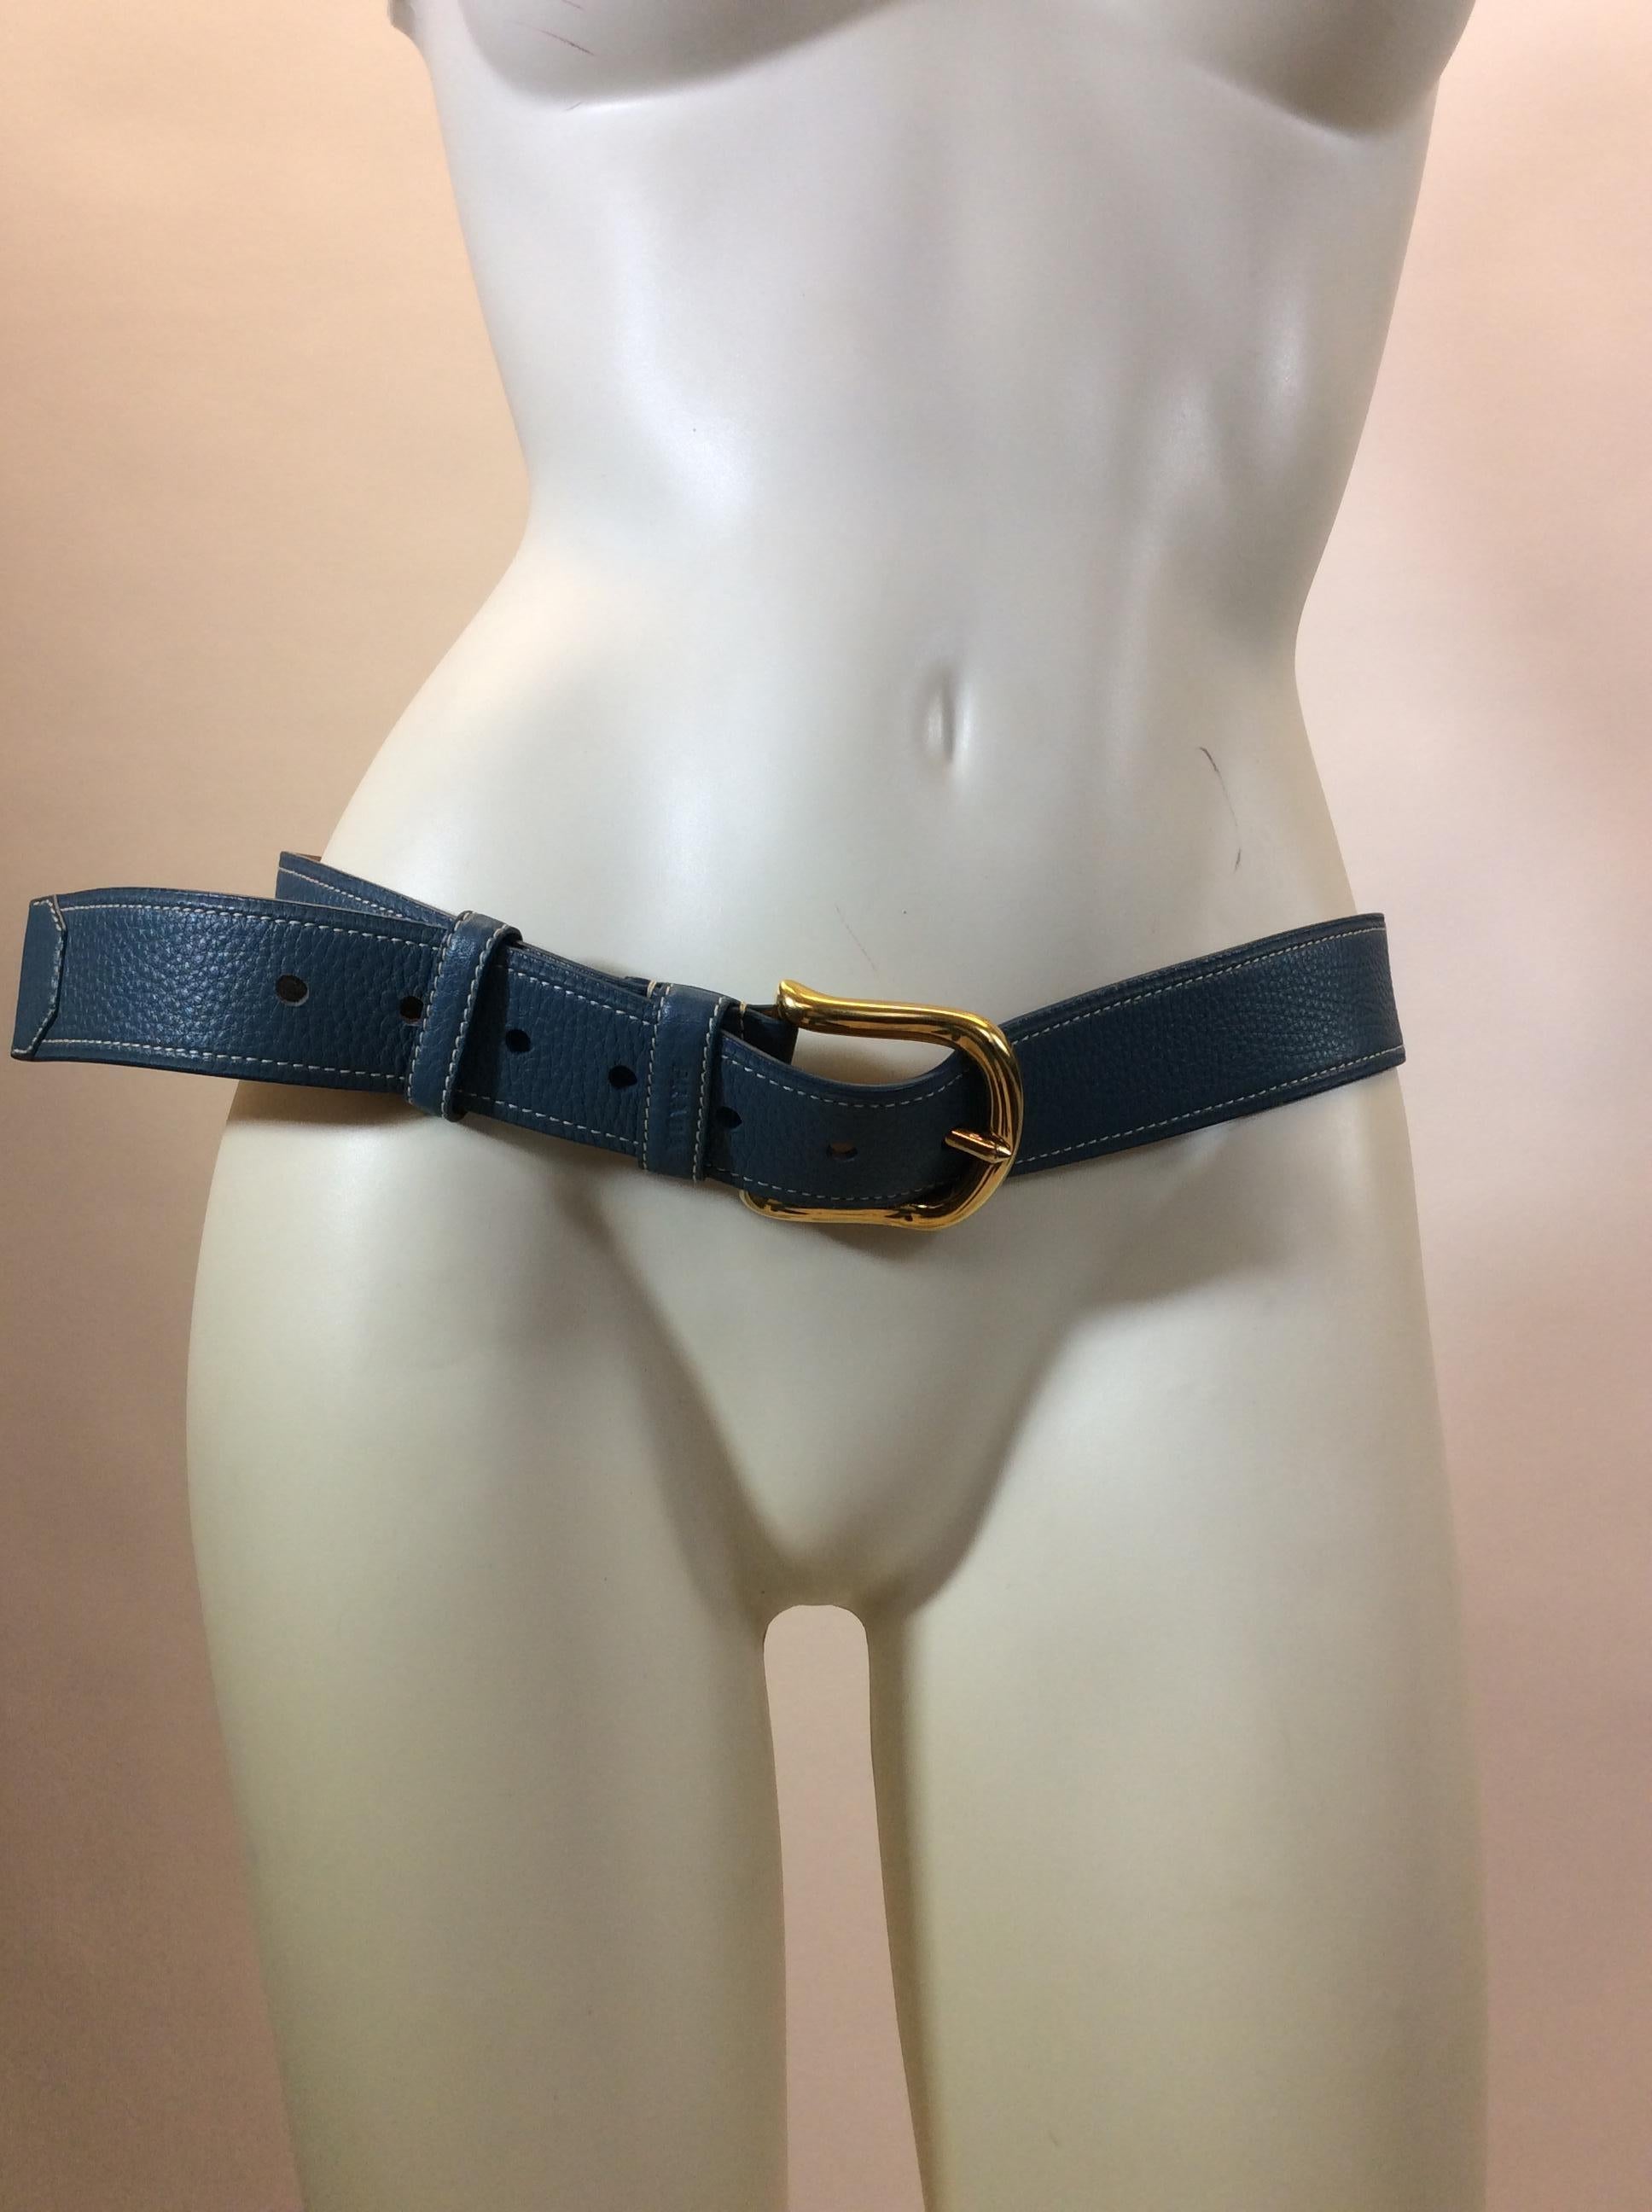 Prada Blue Leather Belt
$108
Made in Italy
Leather
Size 34/85
32